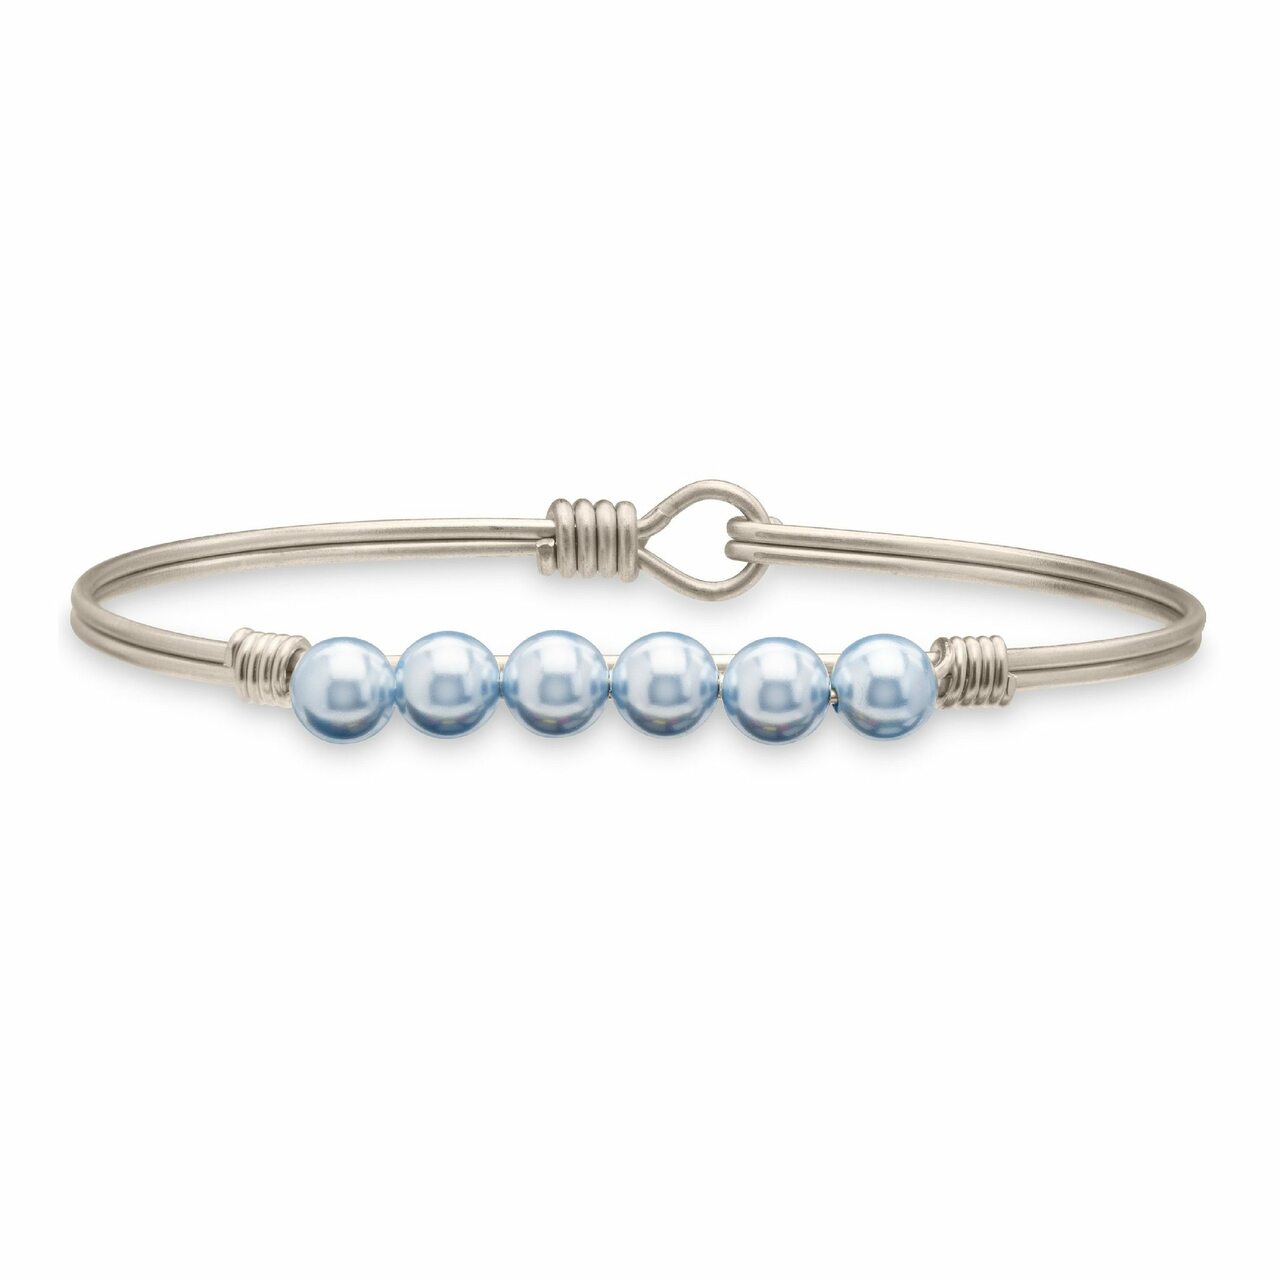 SpearmintLOVE’s baby Baby Blue Crystal Pearl Bangle Bracelet, Silver